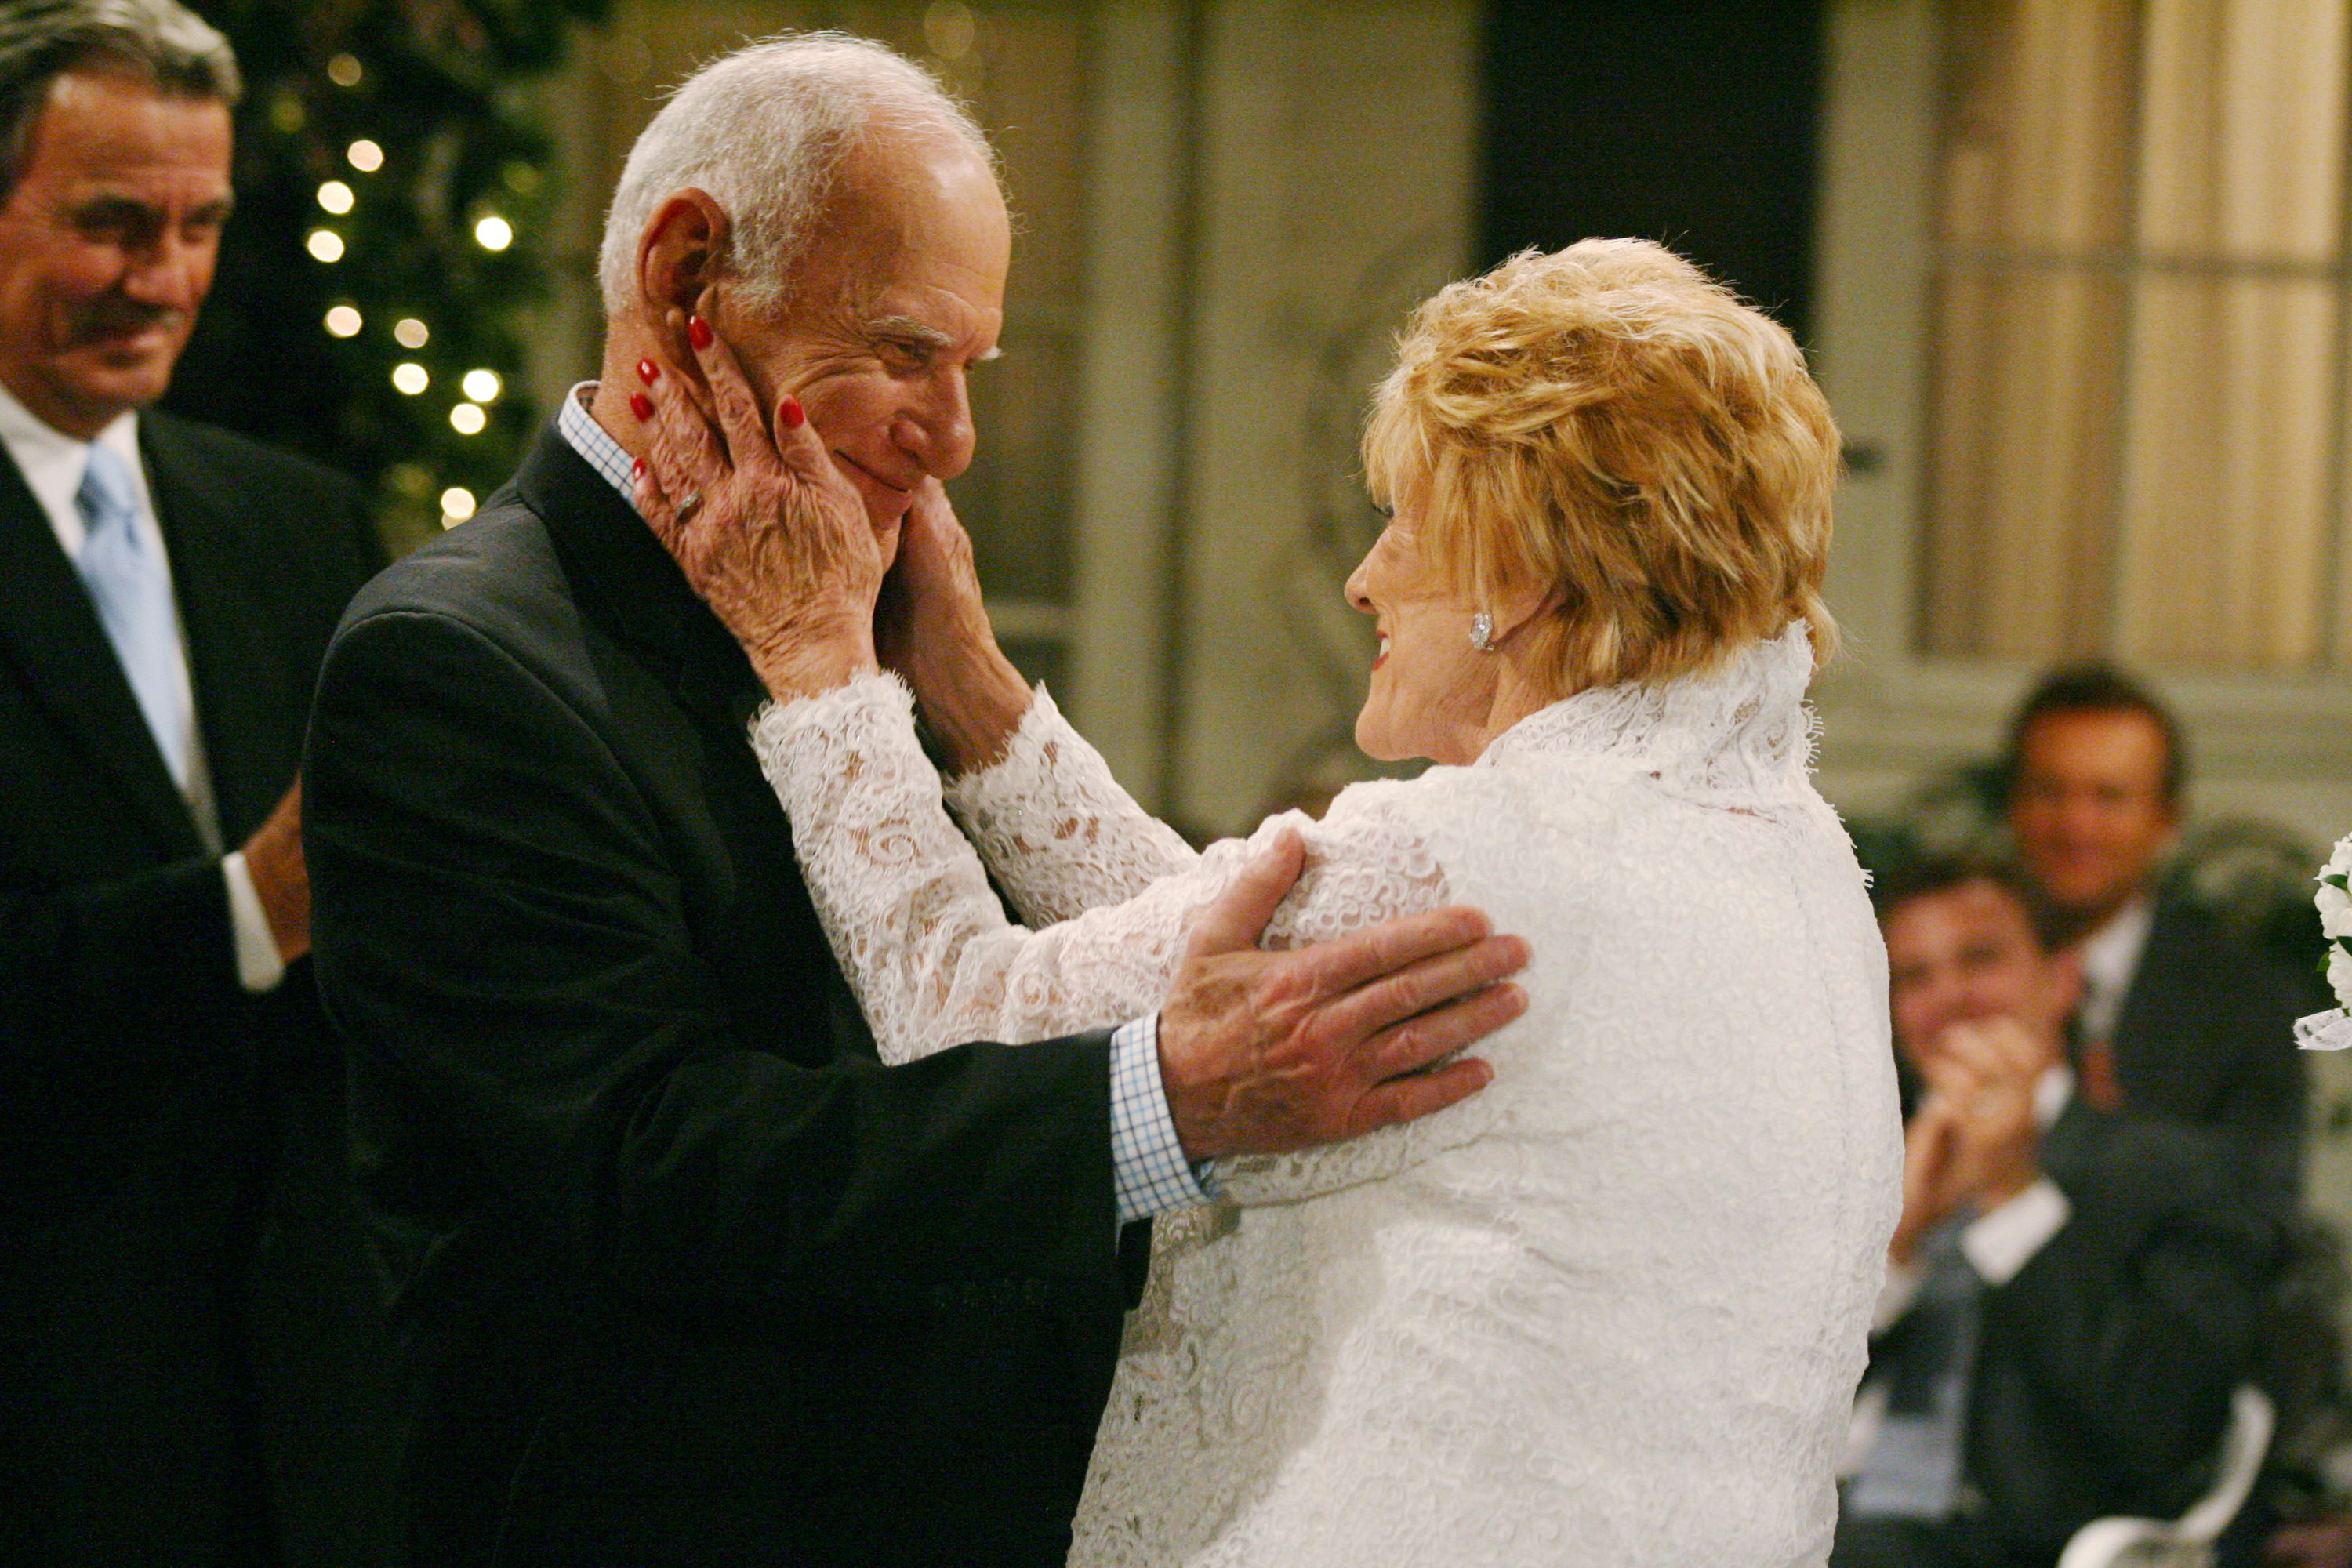 Patrick Murphy and Katherine Chancellor found happiness together later in life.